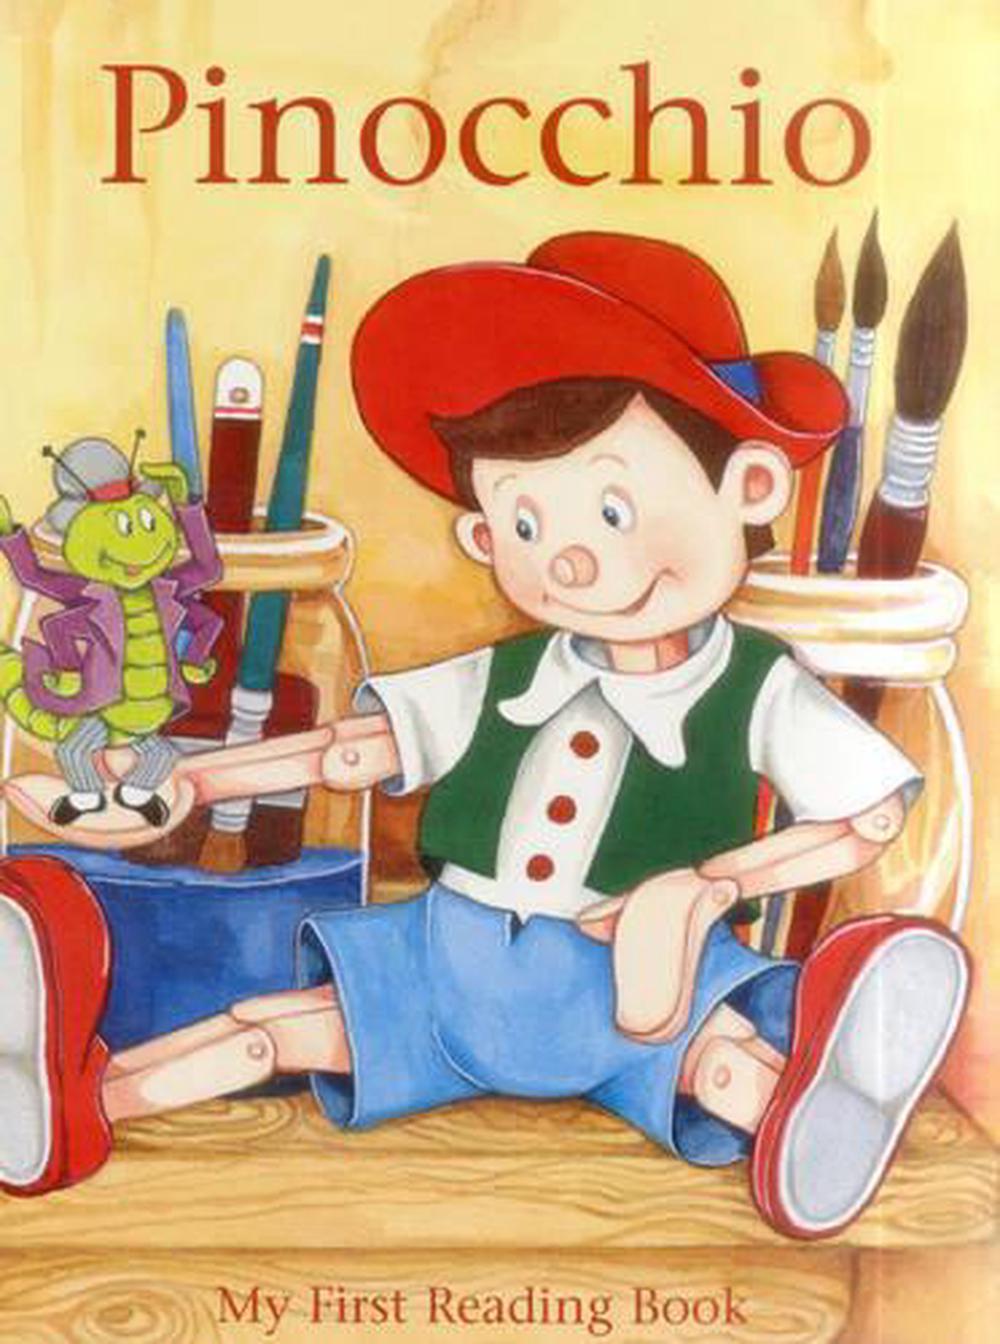 book review about pinocchio